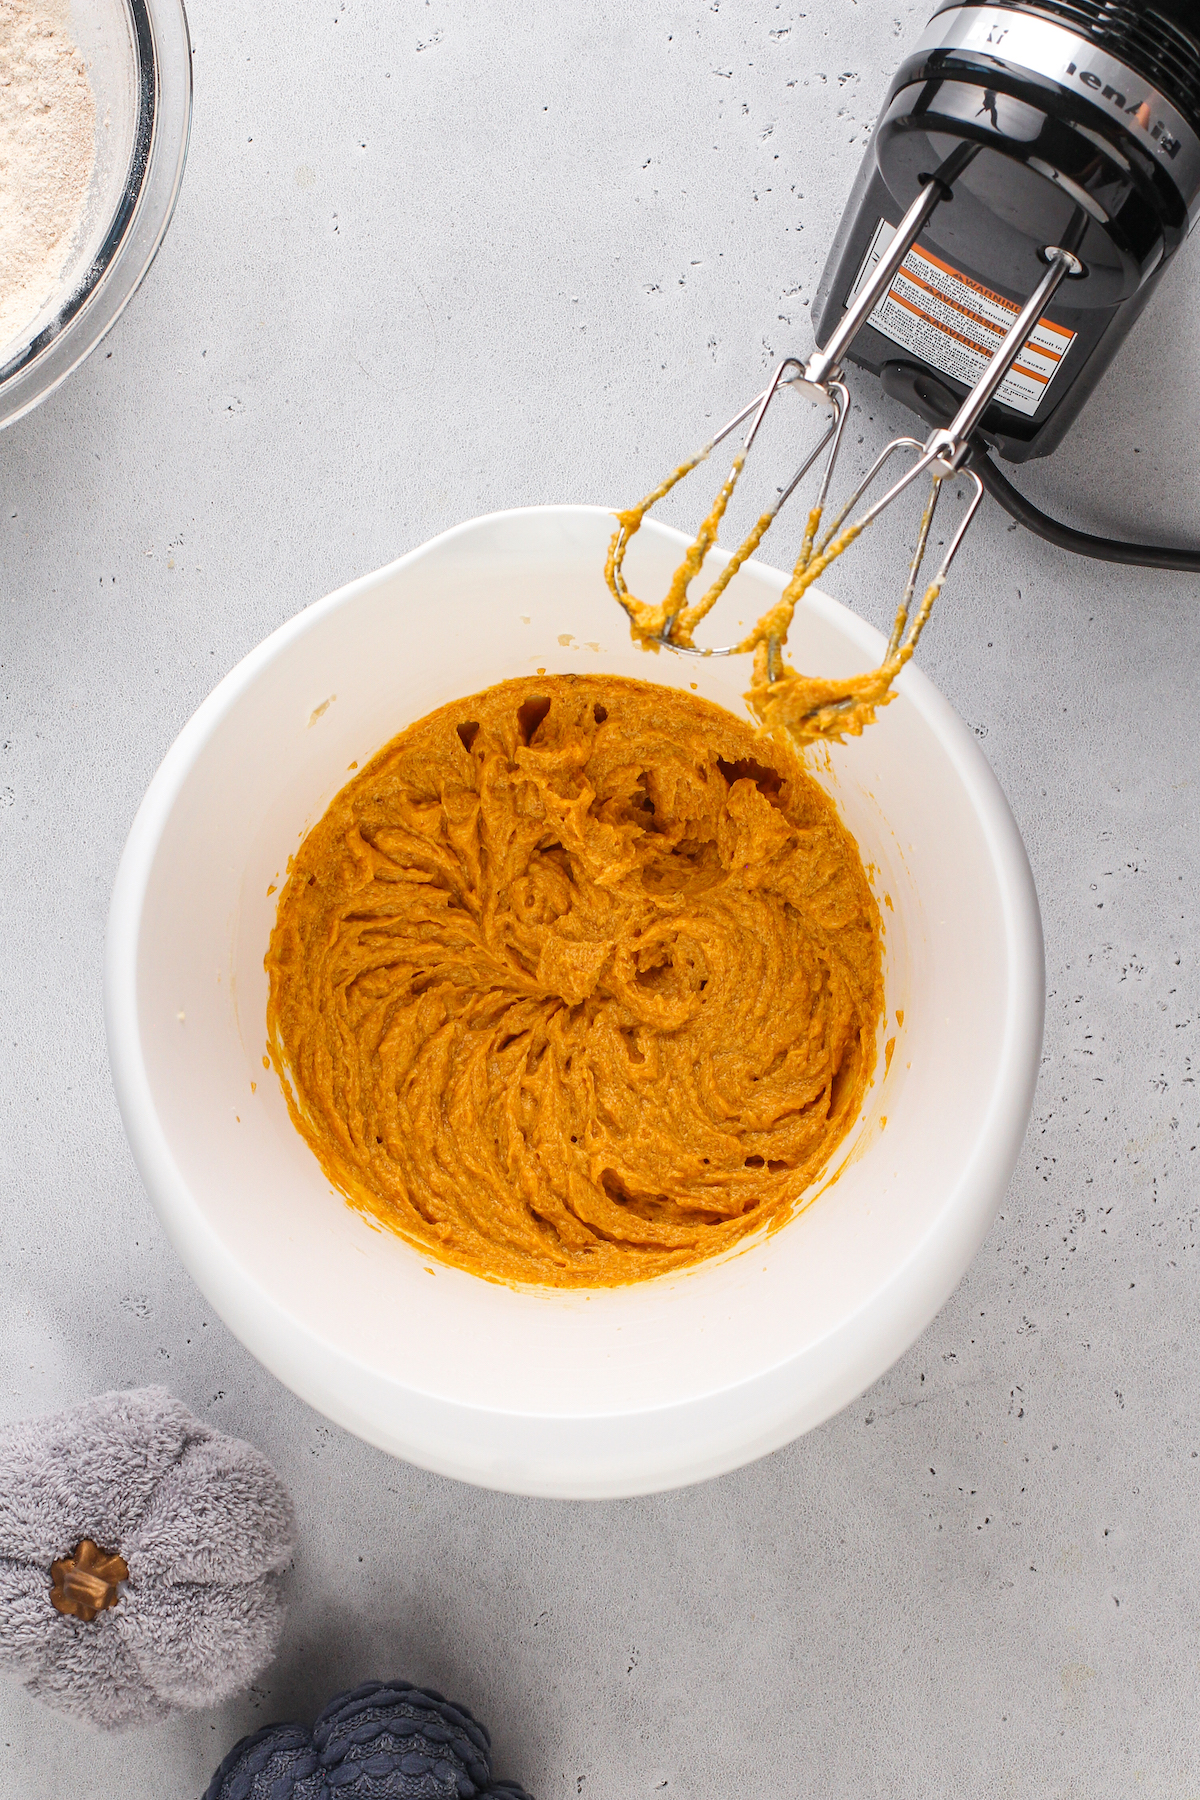 Pumpkin blondie batter in a mixing bowl with a hand mixer.